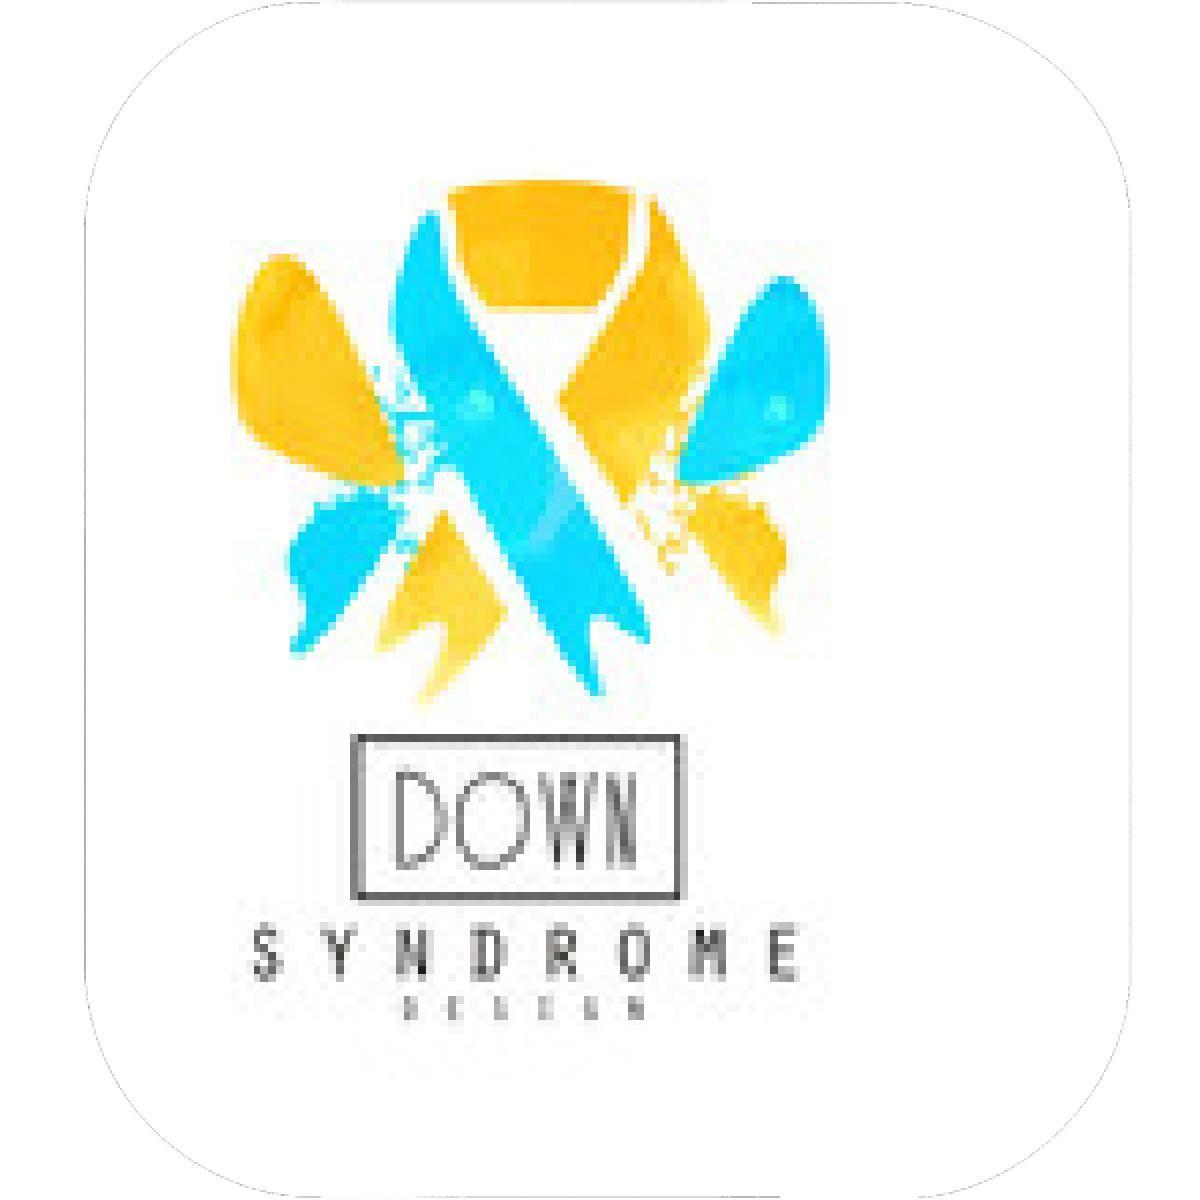 Down Syndrome Butterfly Logo - Designs – Mein Mousepad Design – Mousepad selbst designen